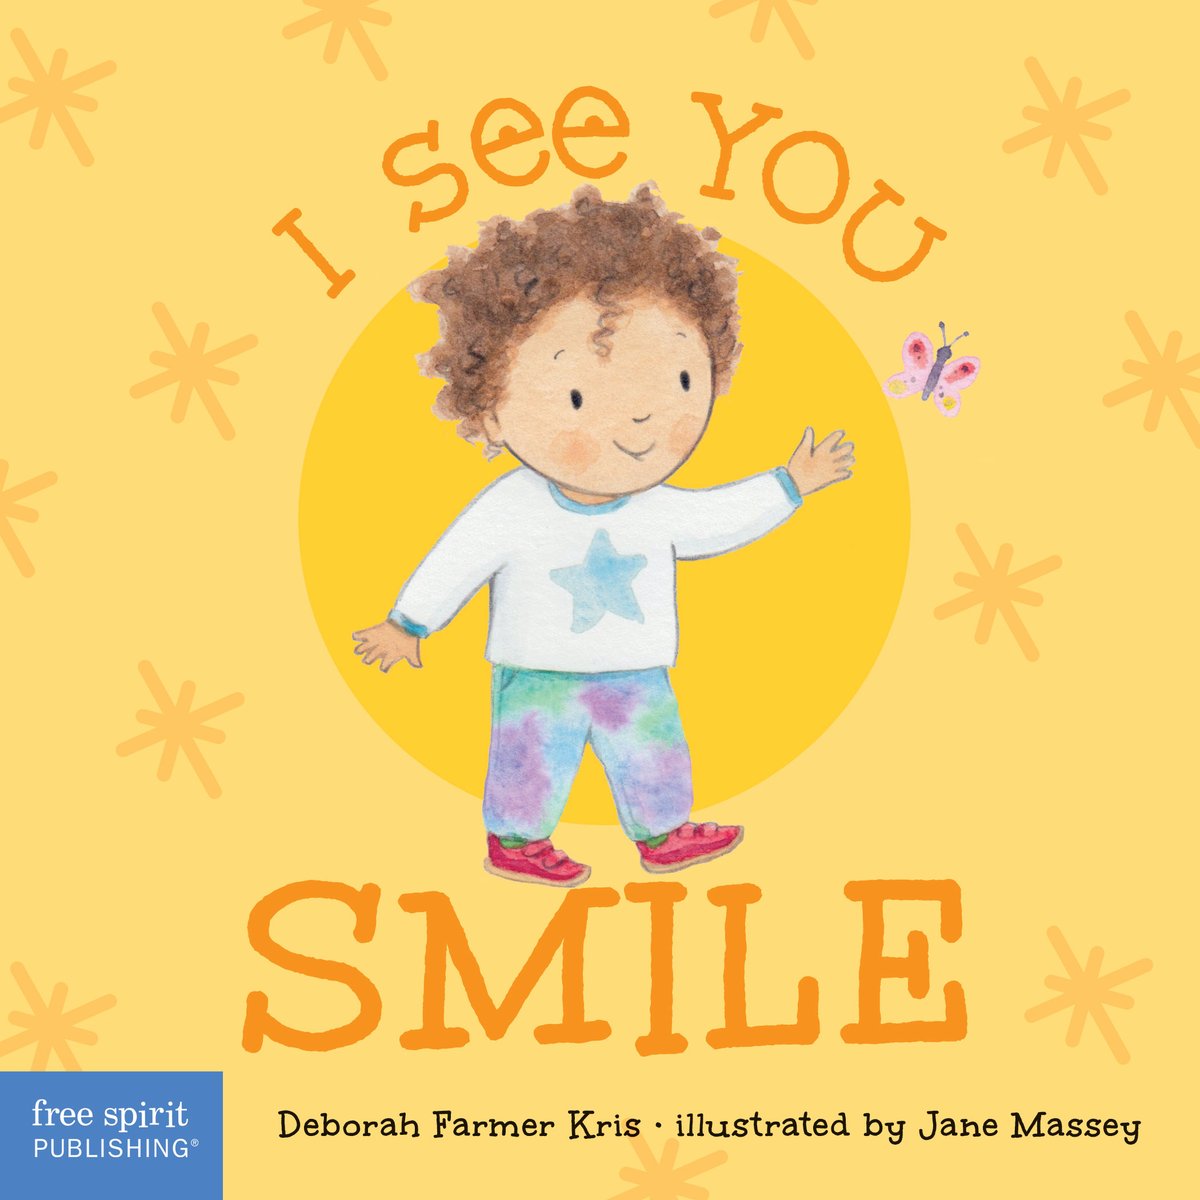 If you read & loved the All the Time series by @dfkris, be sure to check out the forthcoming I SEE YOU board book series! I SEE YOU SMILE, the first book, is a READ NOW on NetGalley for a limited time! netgalley.com/catalog/book/3…